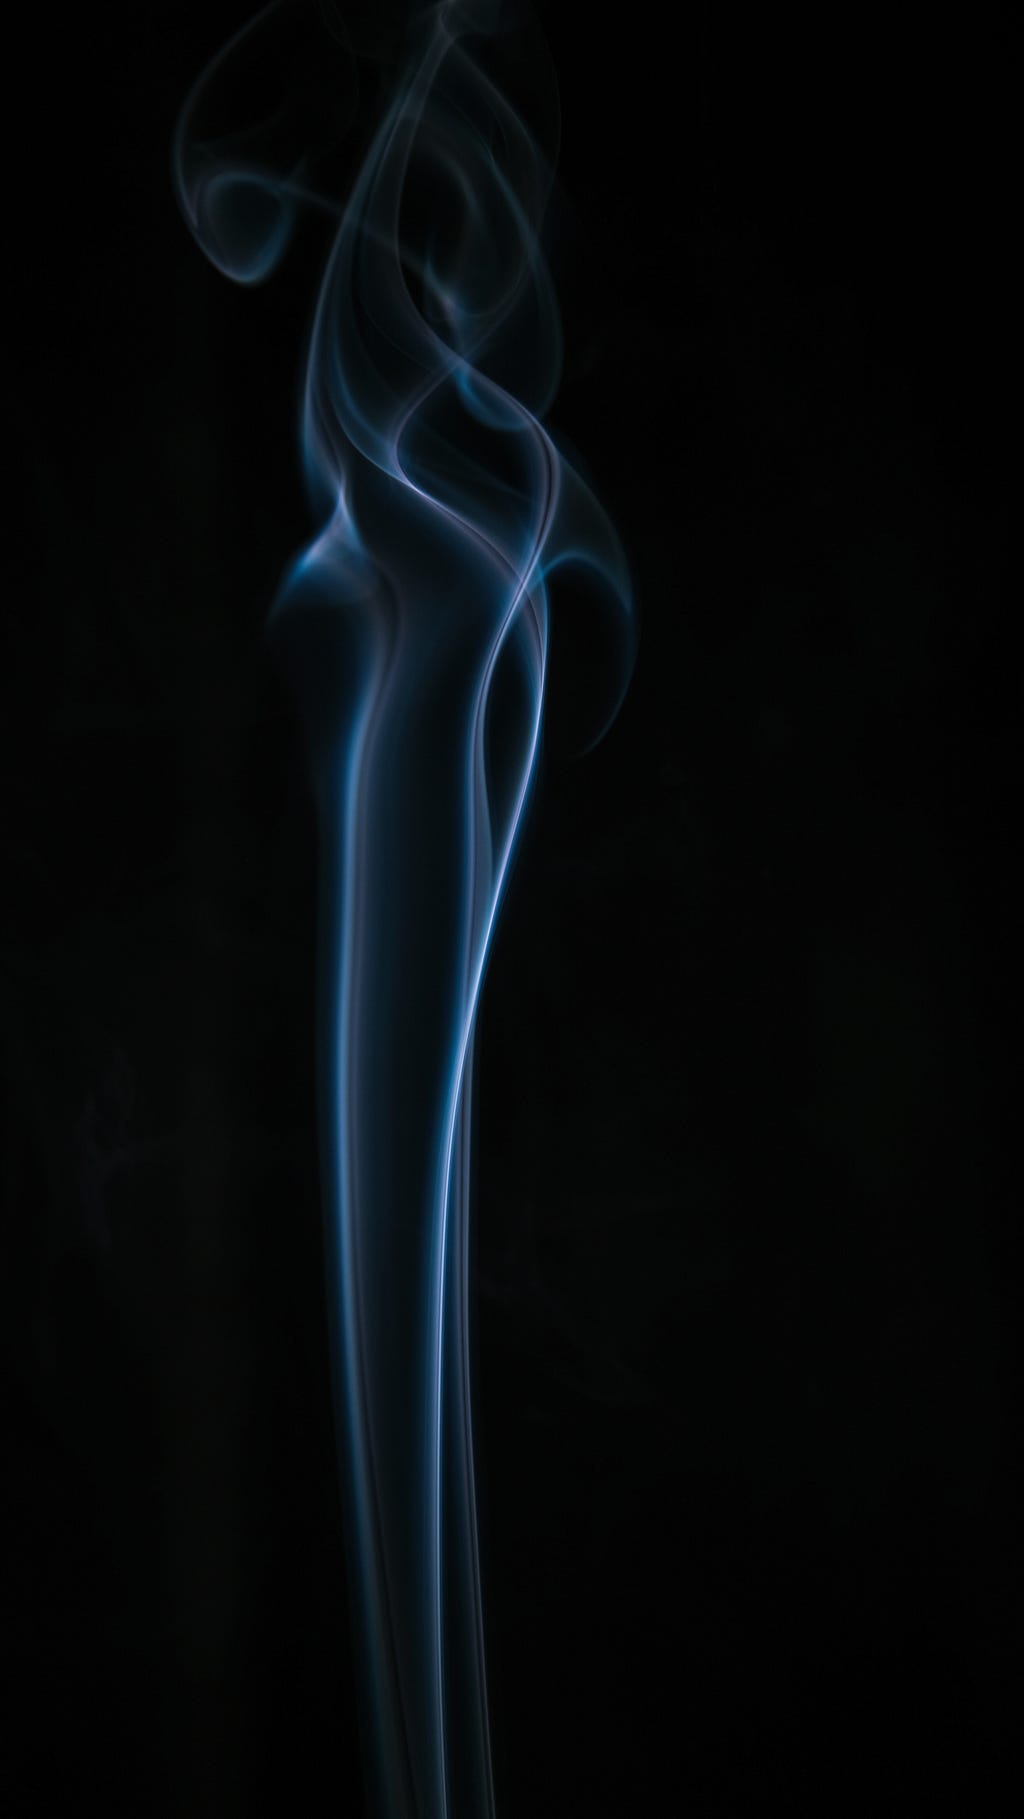 A long vertical puff of blue smoke set against a black background.